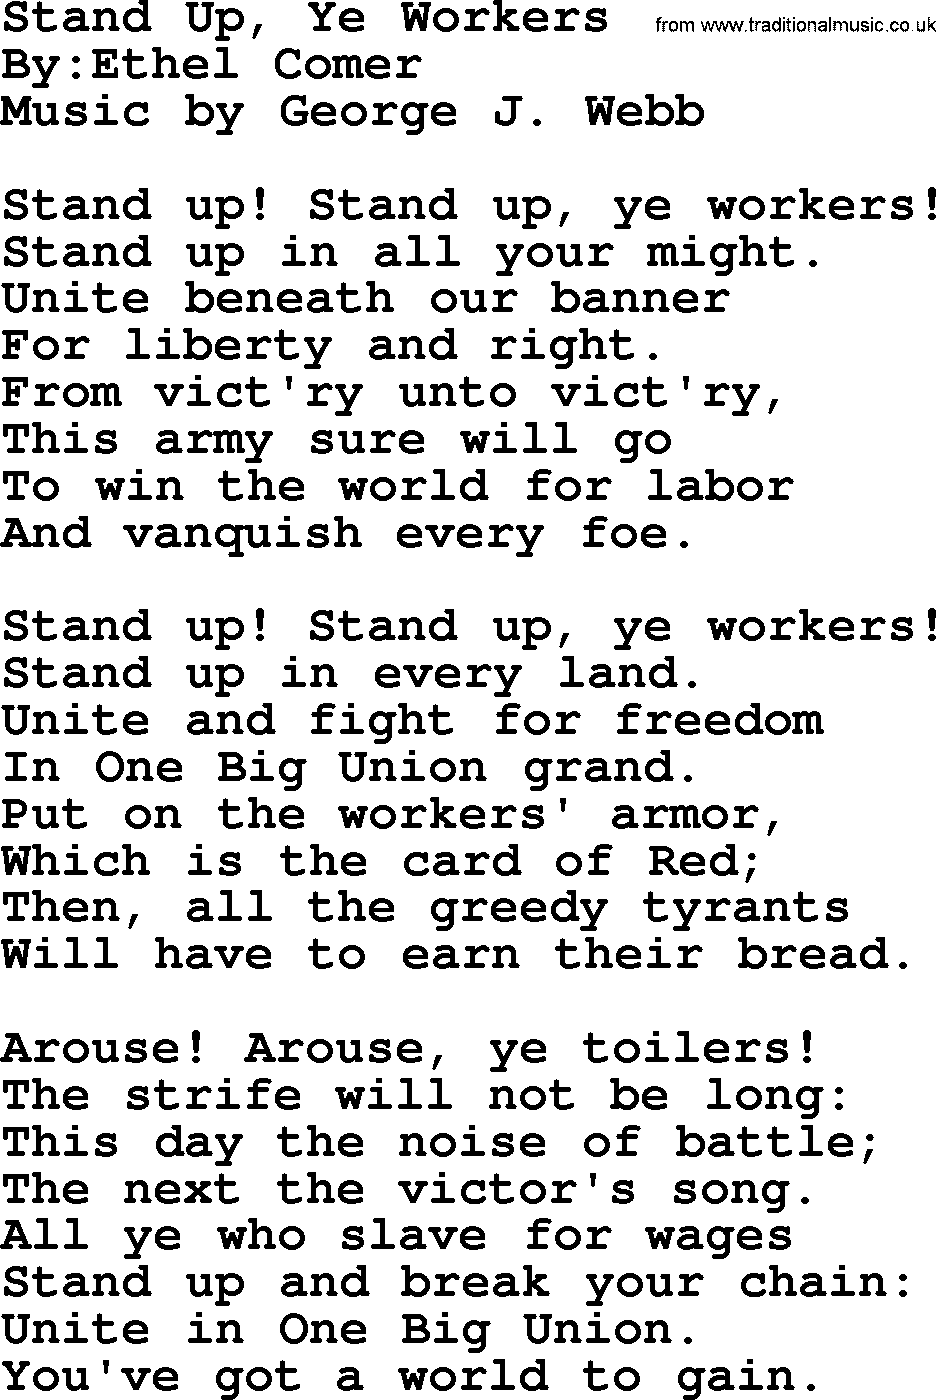 Political, Solidarity, Workers or Union song: Stand Up Ye Workers, lyrics